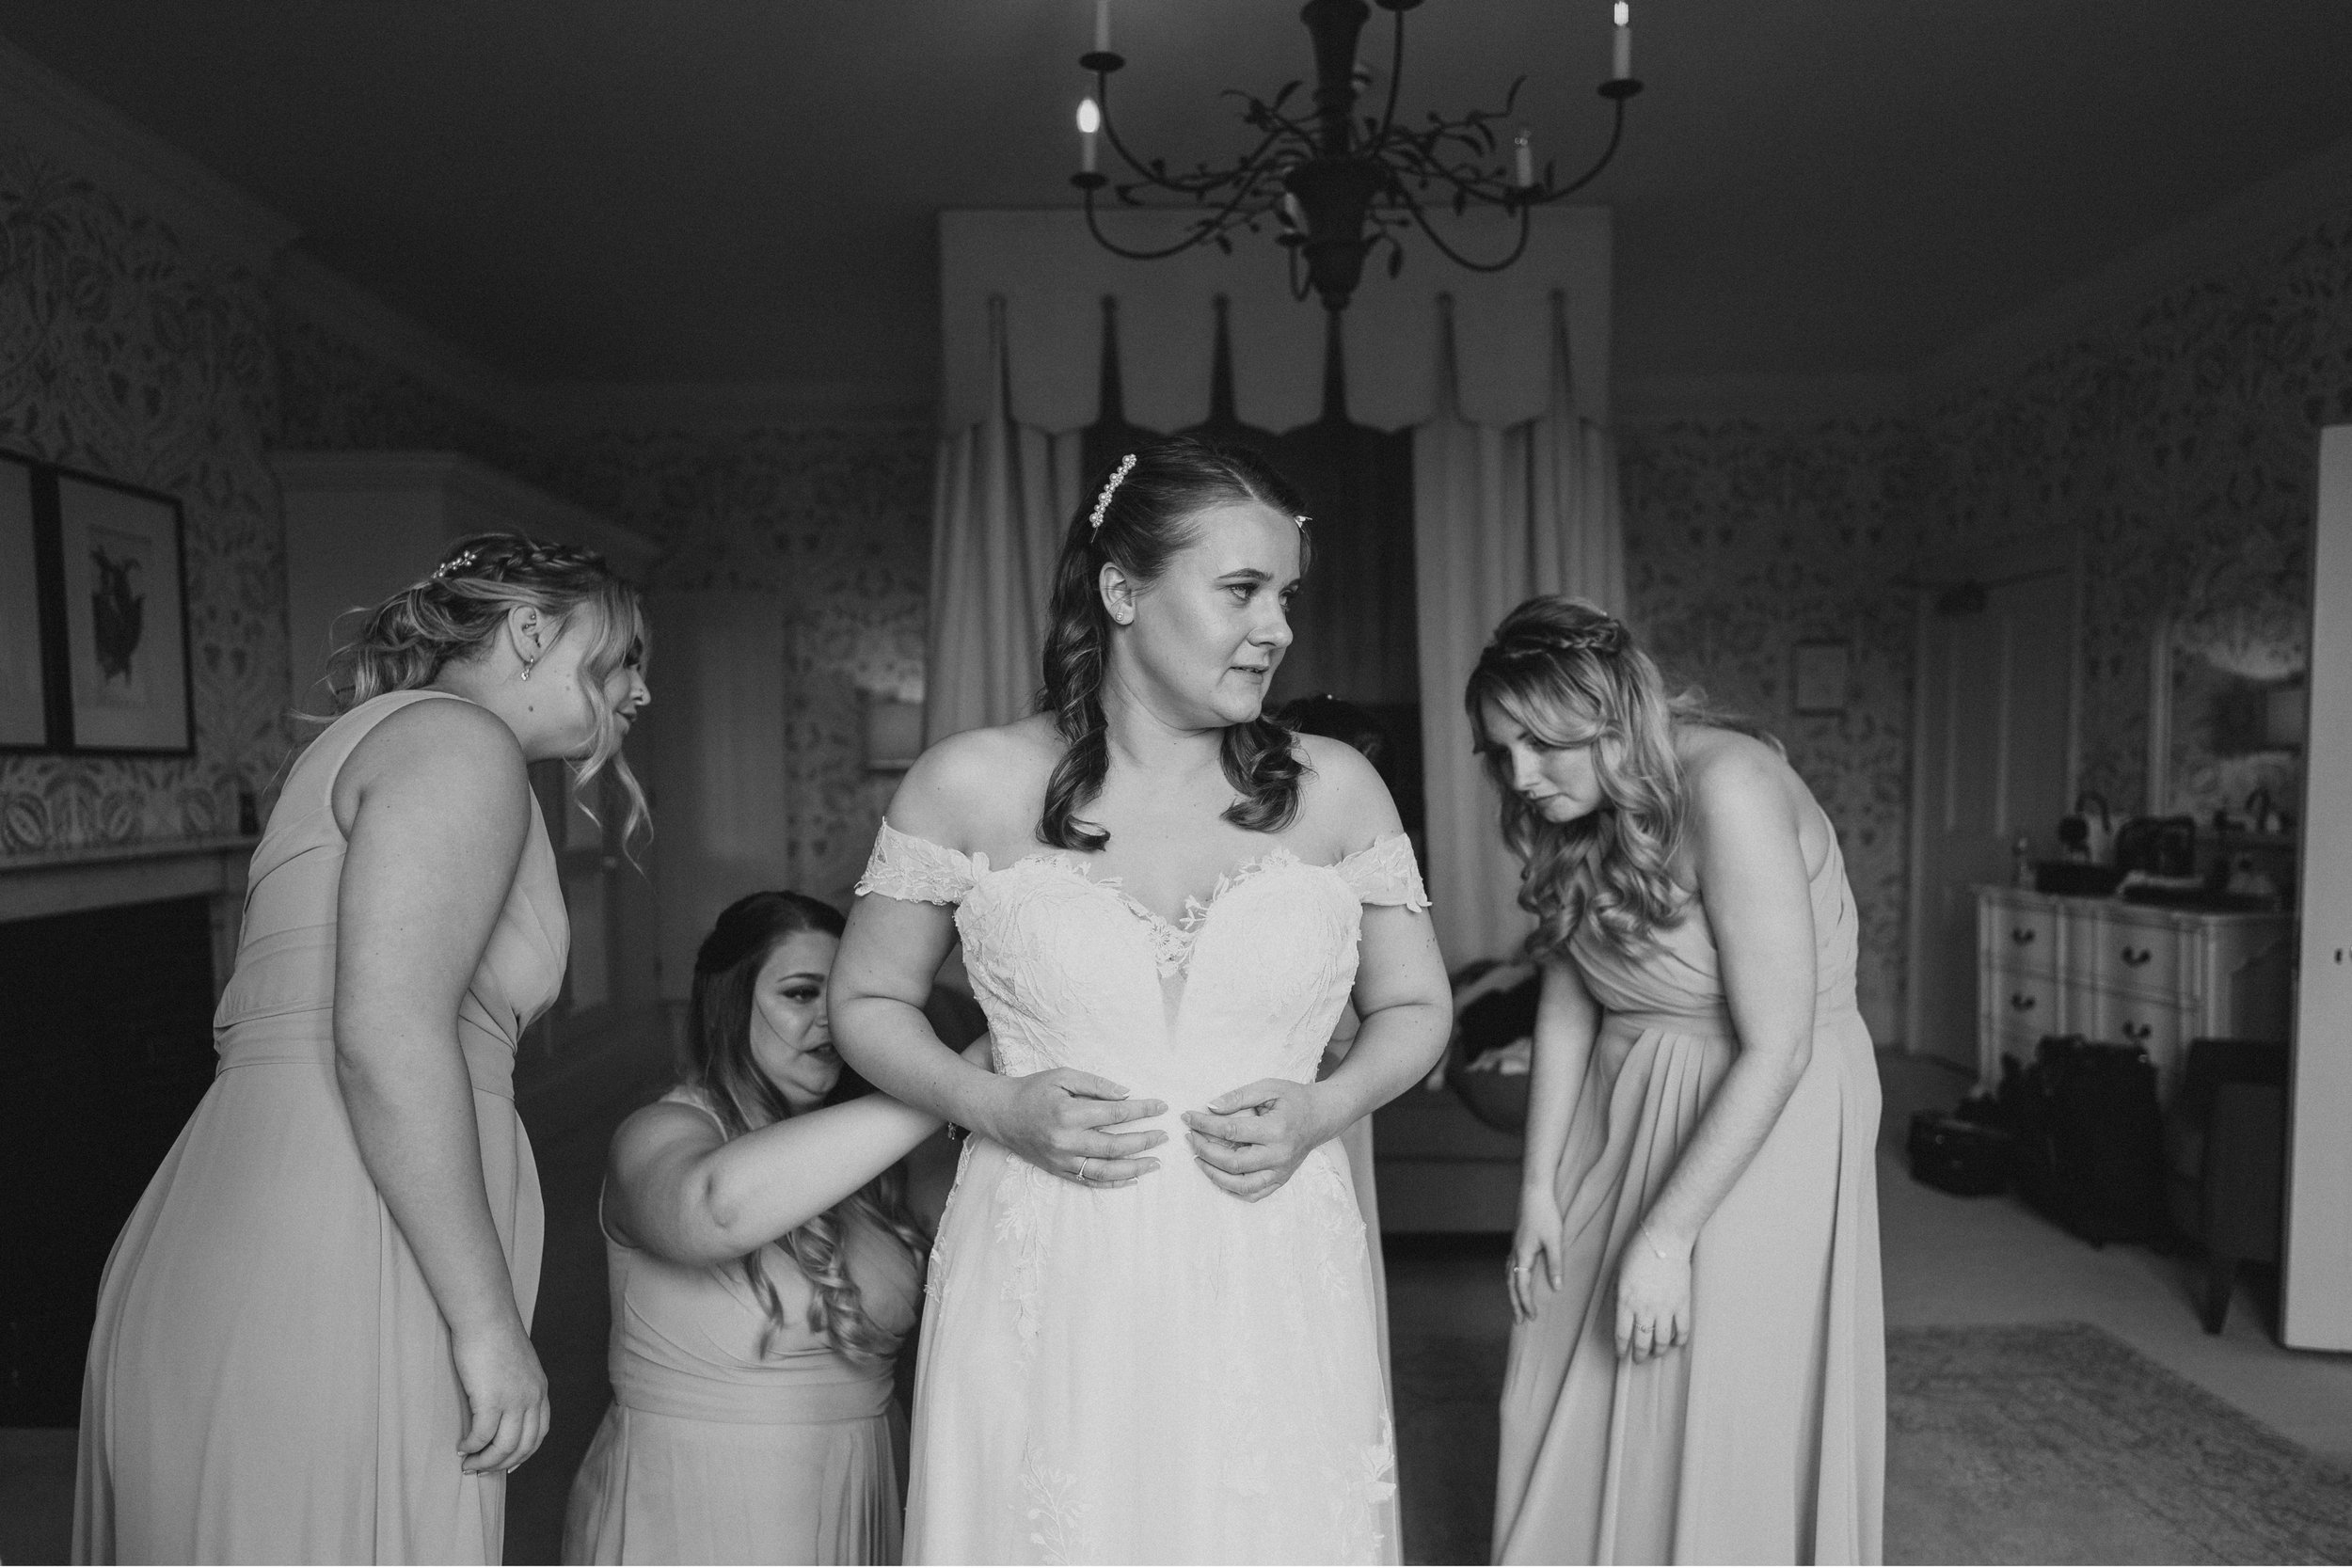 HODSOCK PRIORY WEDDING PHOTOGRAPHY - bride getting help from her bridesmaids in putting the wedding dress on